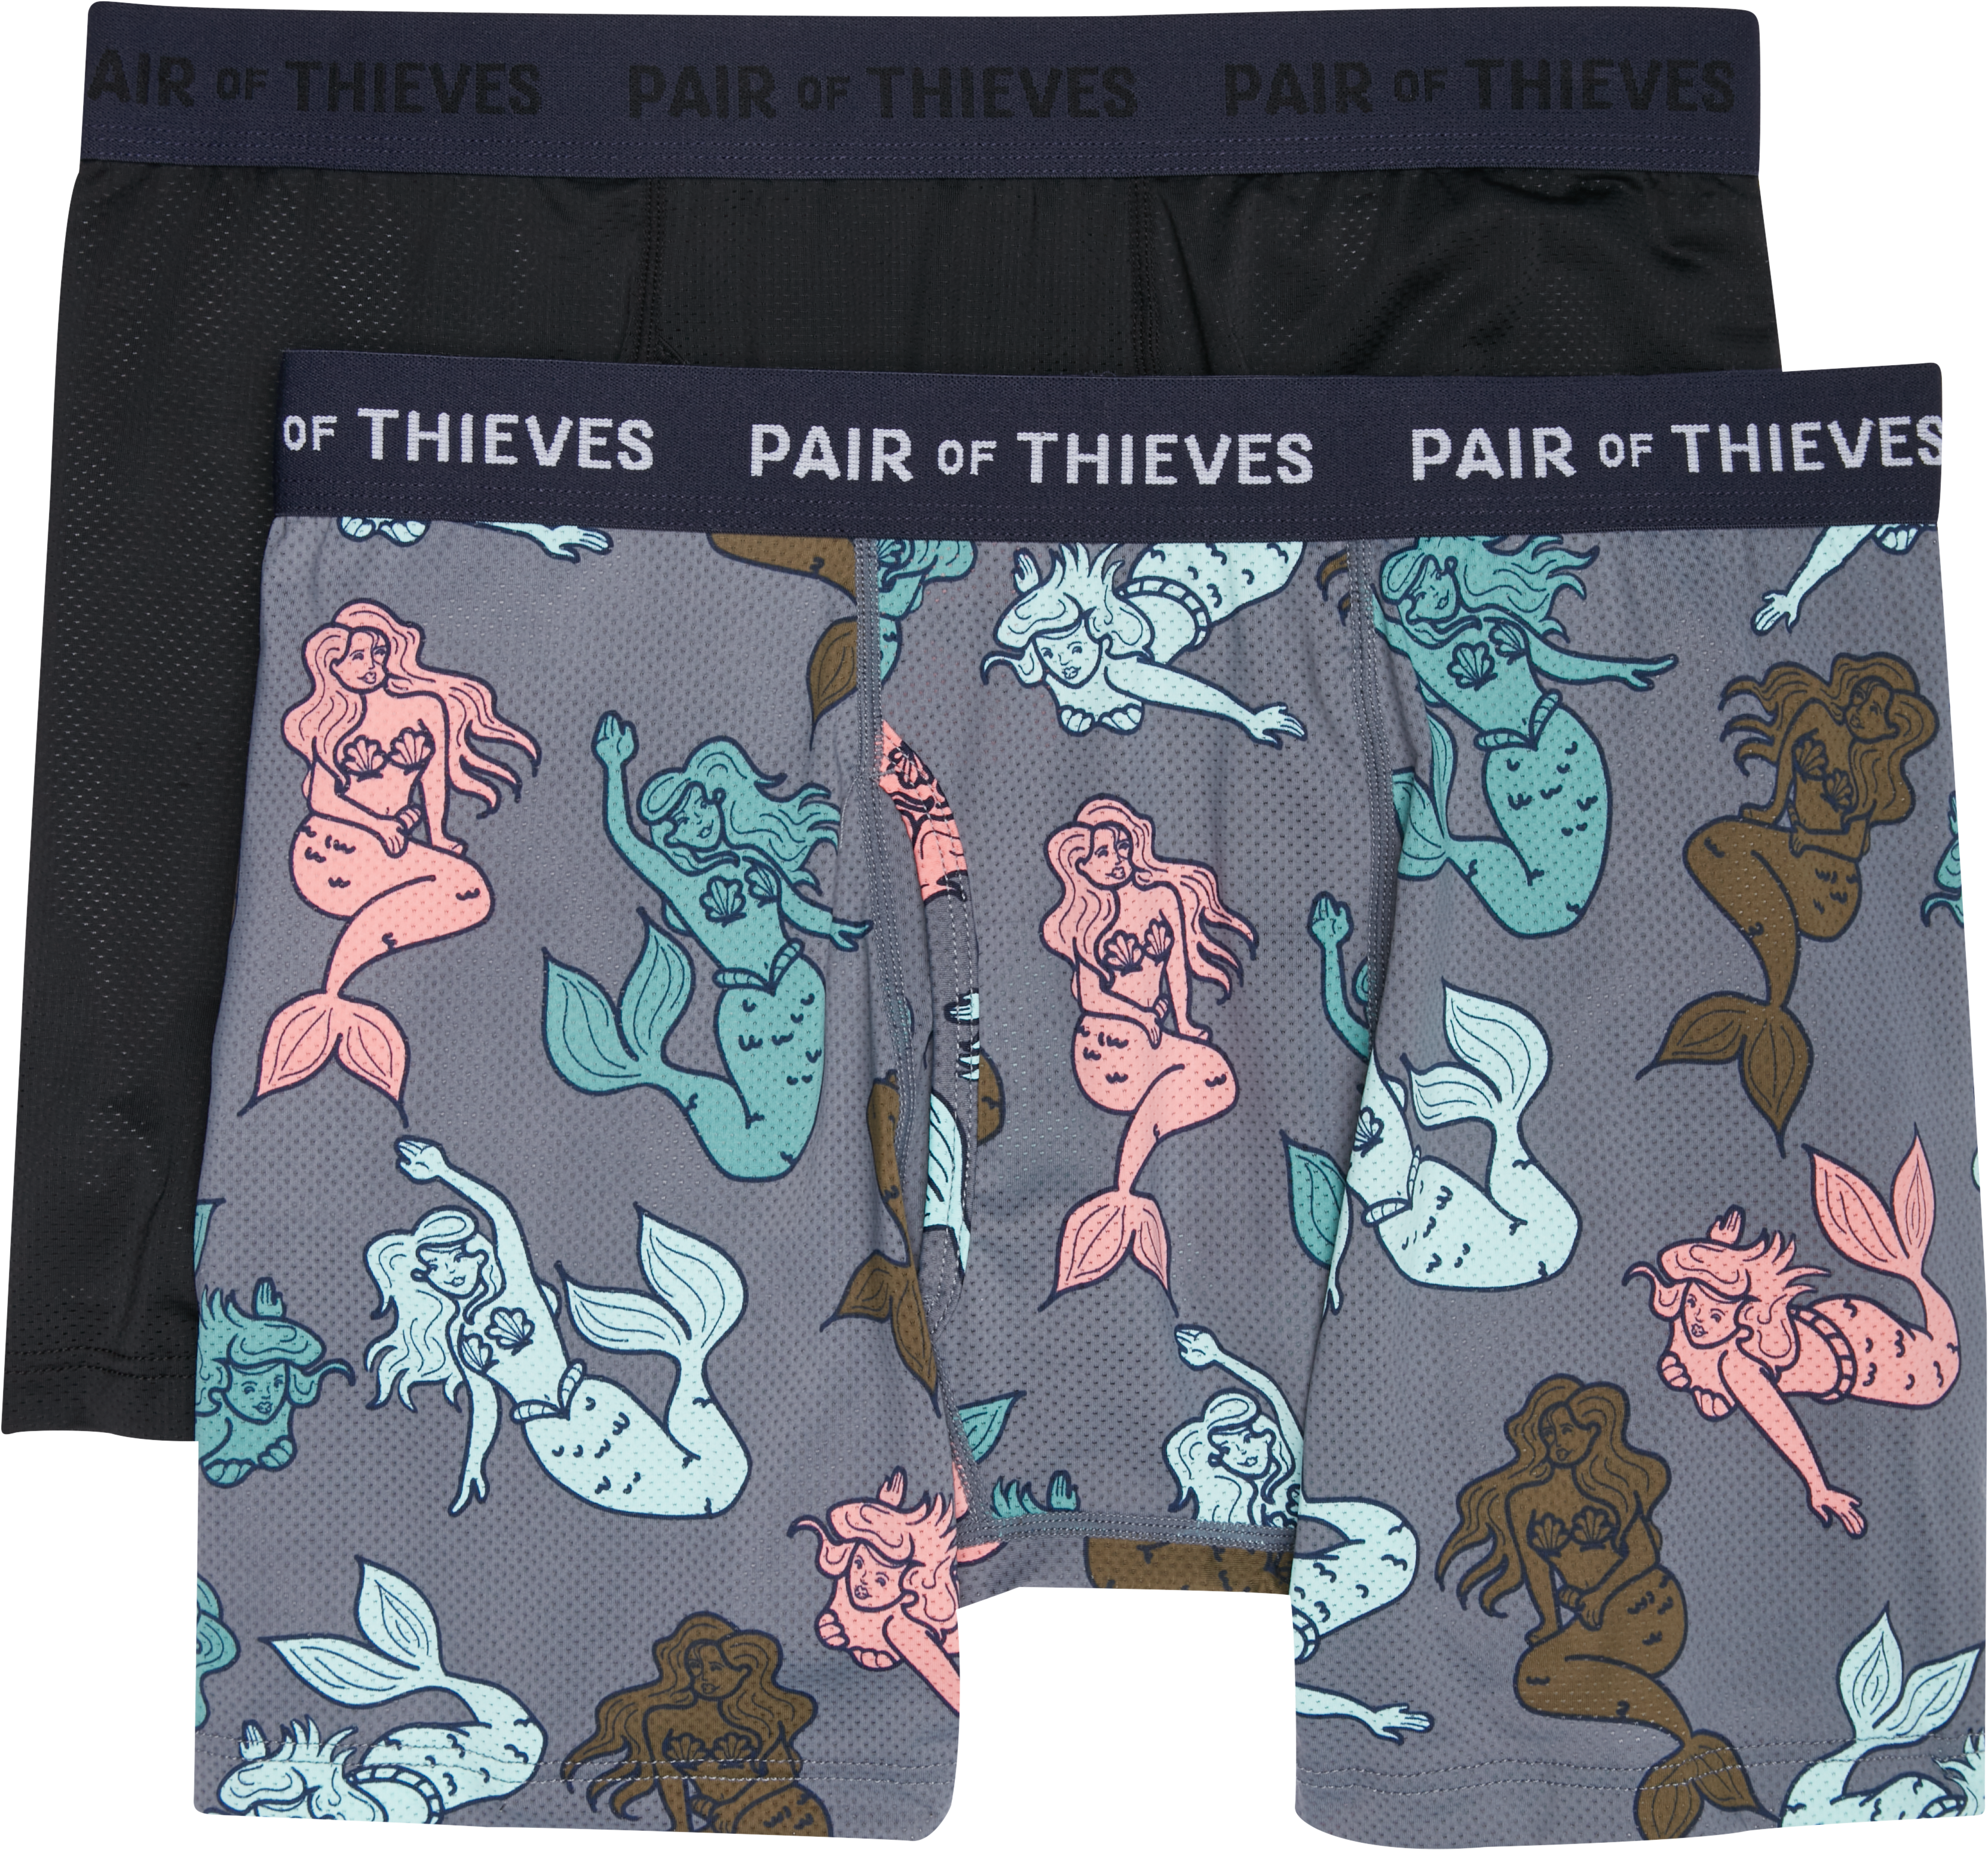 https://image.menswearhouse.com/is/image/TMW/TMW_8YHC_04_PAIR_OF_THIEVES_UNDERWEAR_DUSTY_BLUE_MAIN